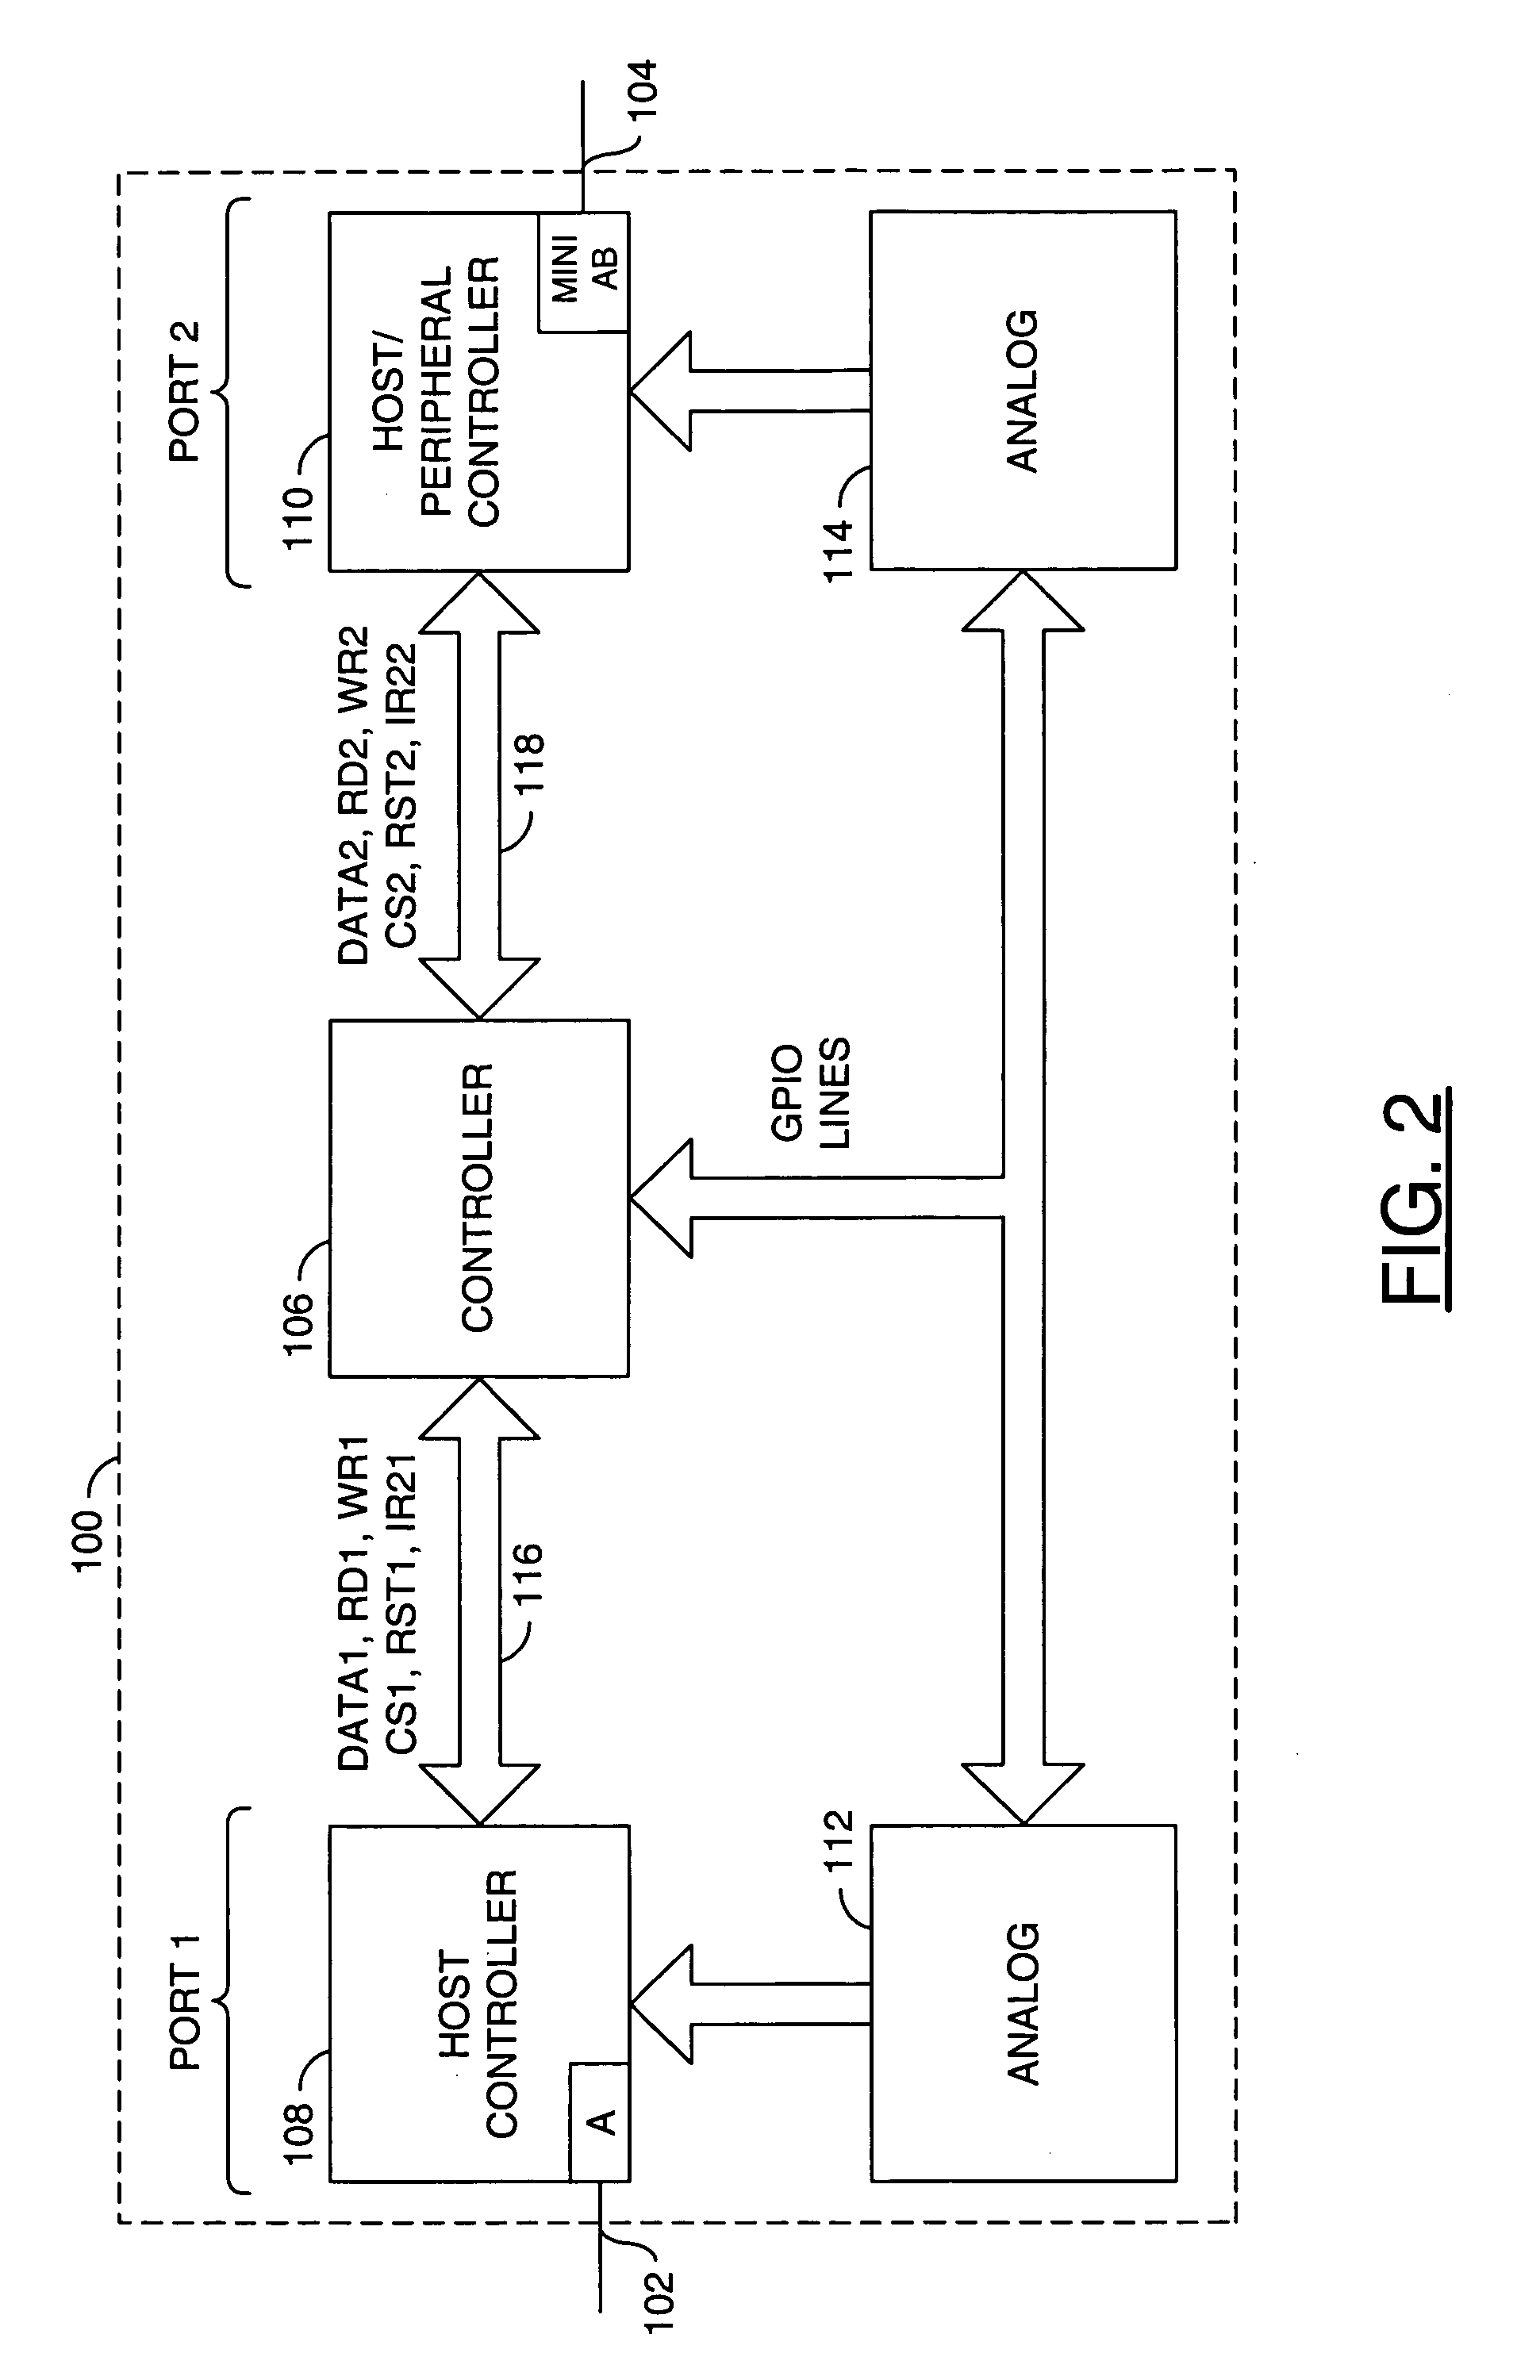 Method and apparatus for adding OTG dual role device capability to a USB peripheral